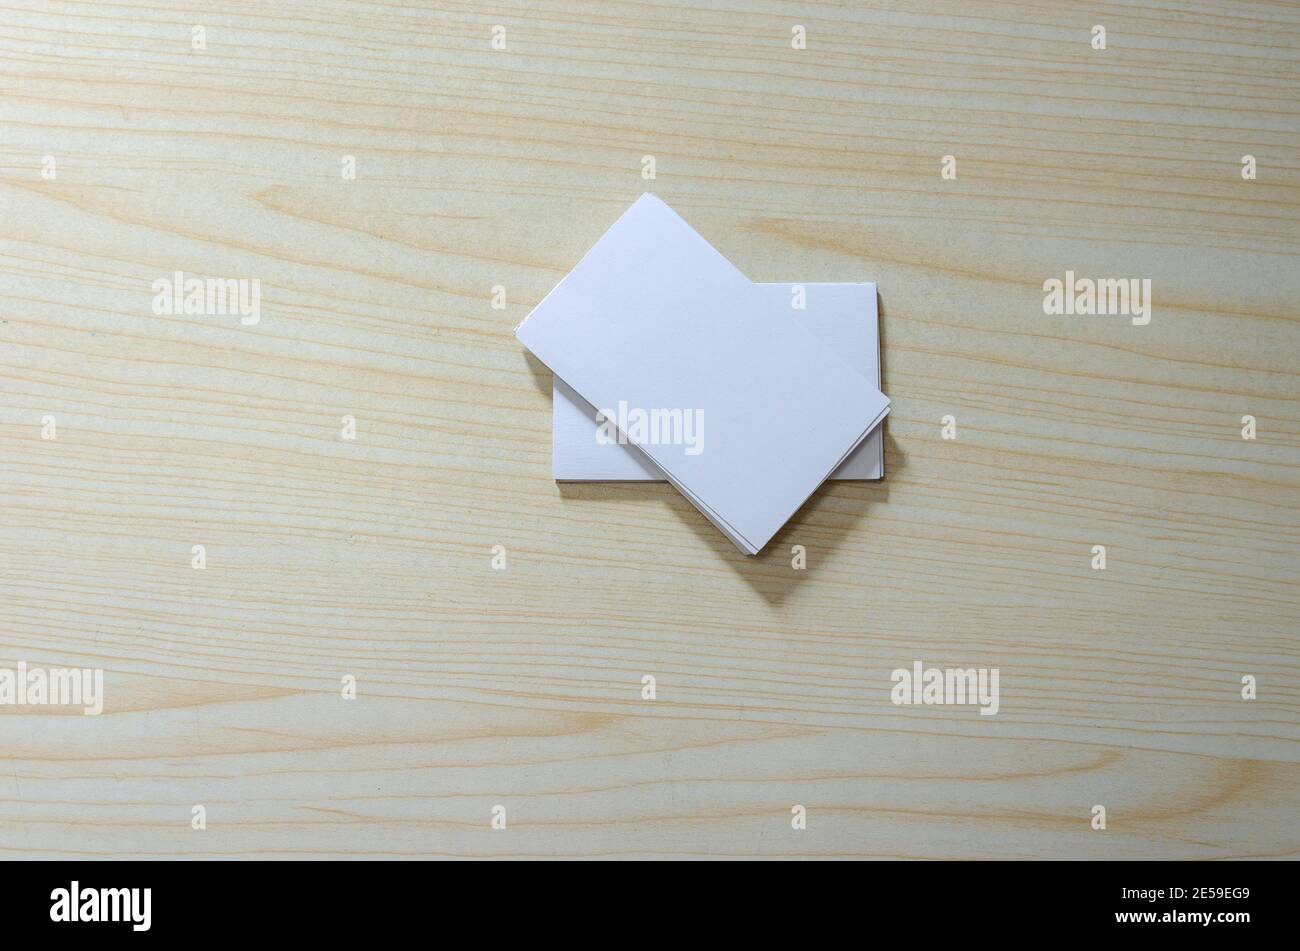 Blank Paper Mockup for Business Cards on wood. Stock Photo